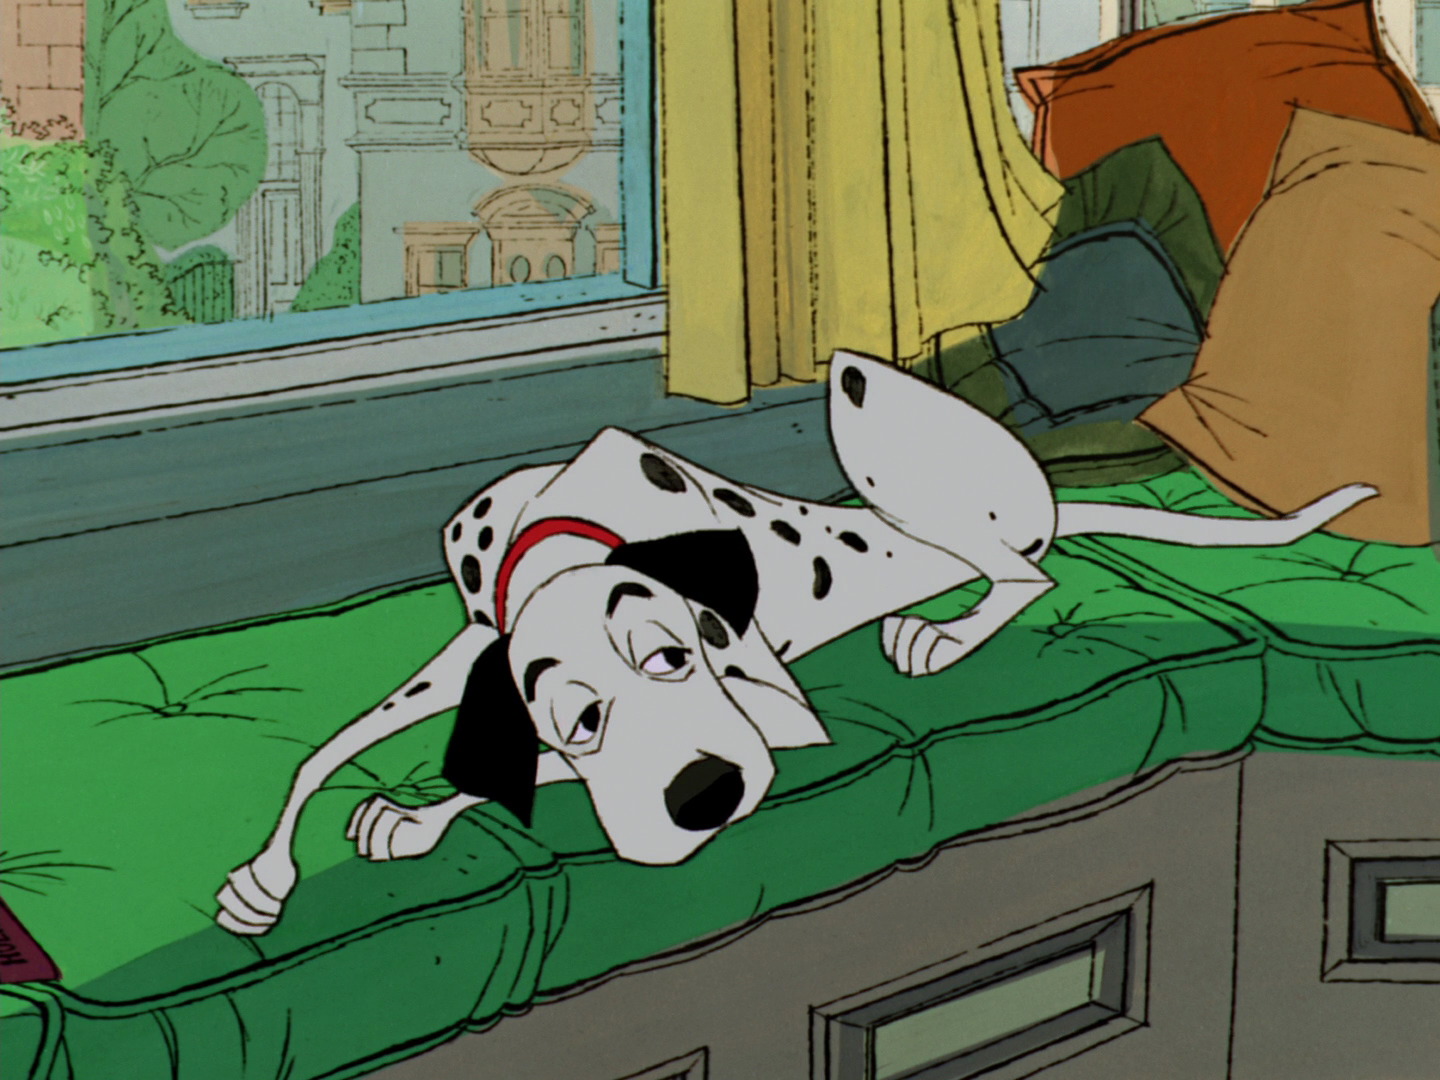 © 1961/Disney/101 Dalmatians/All Rights Reserved.